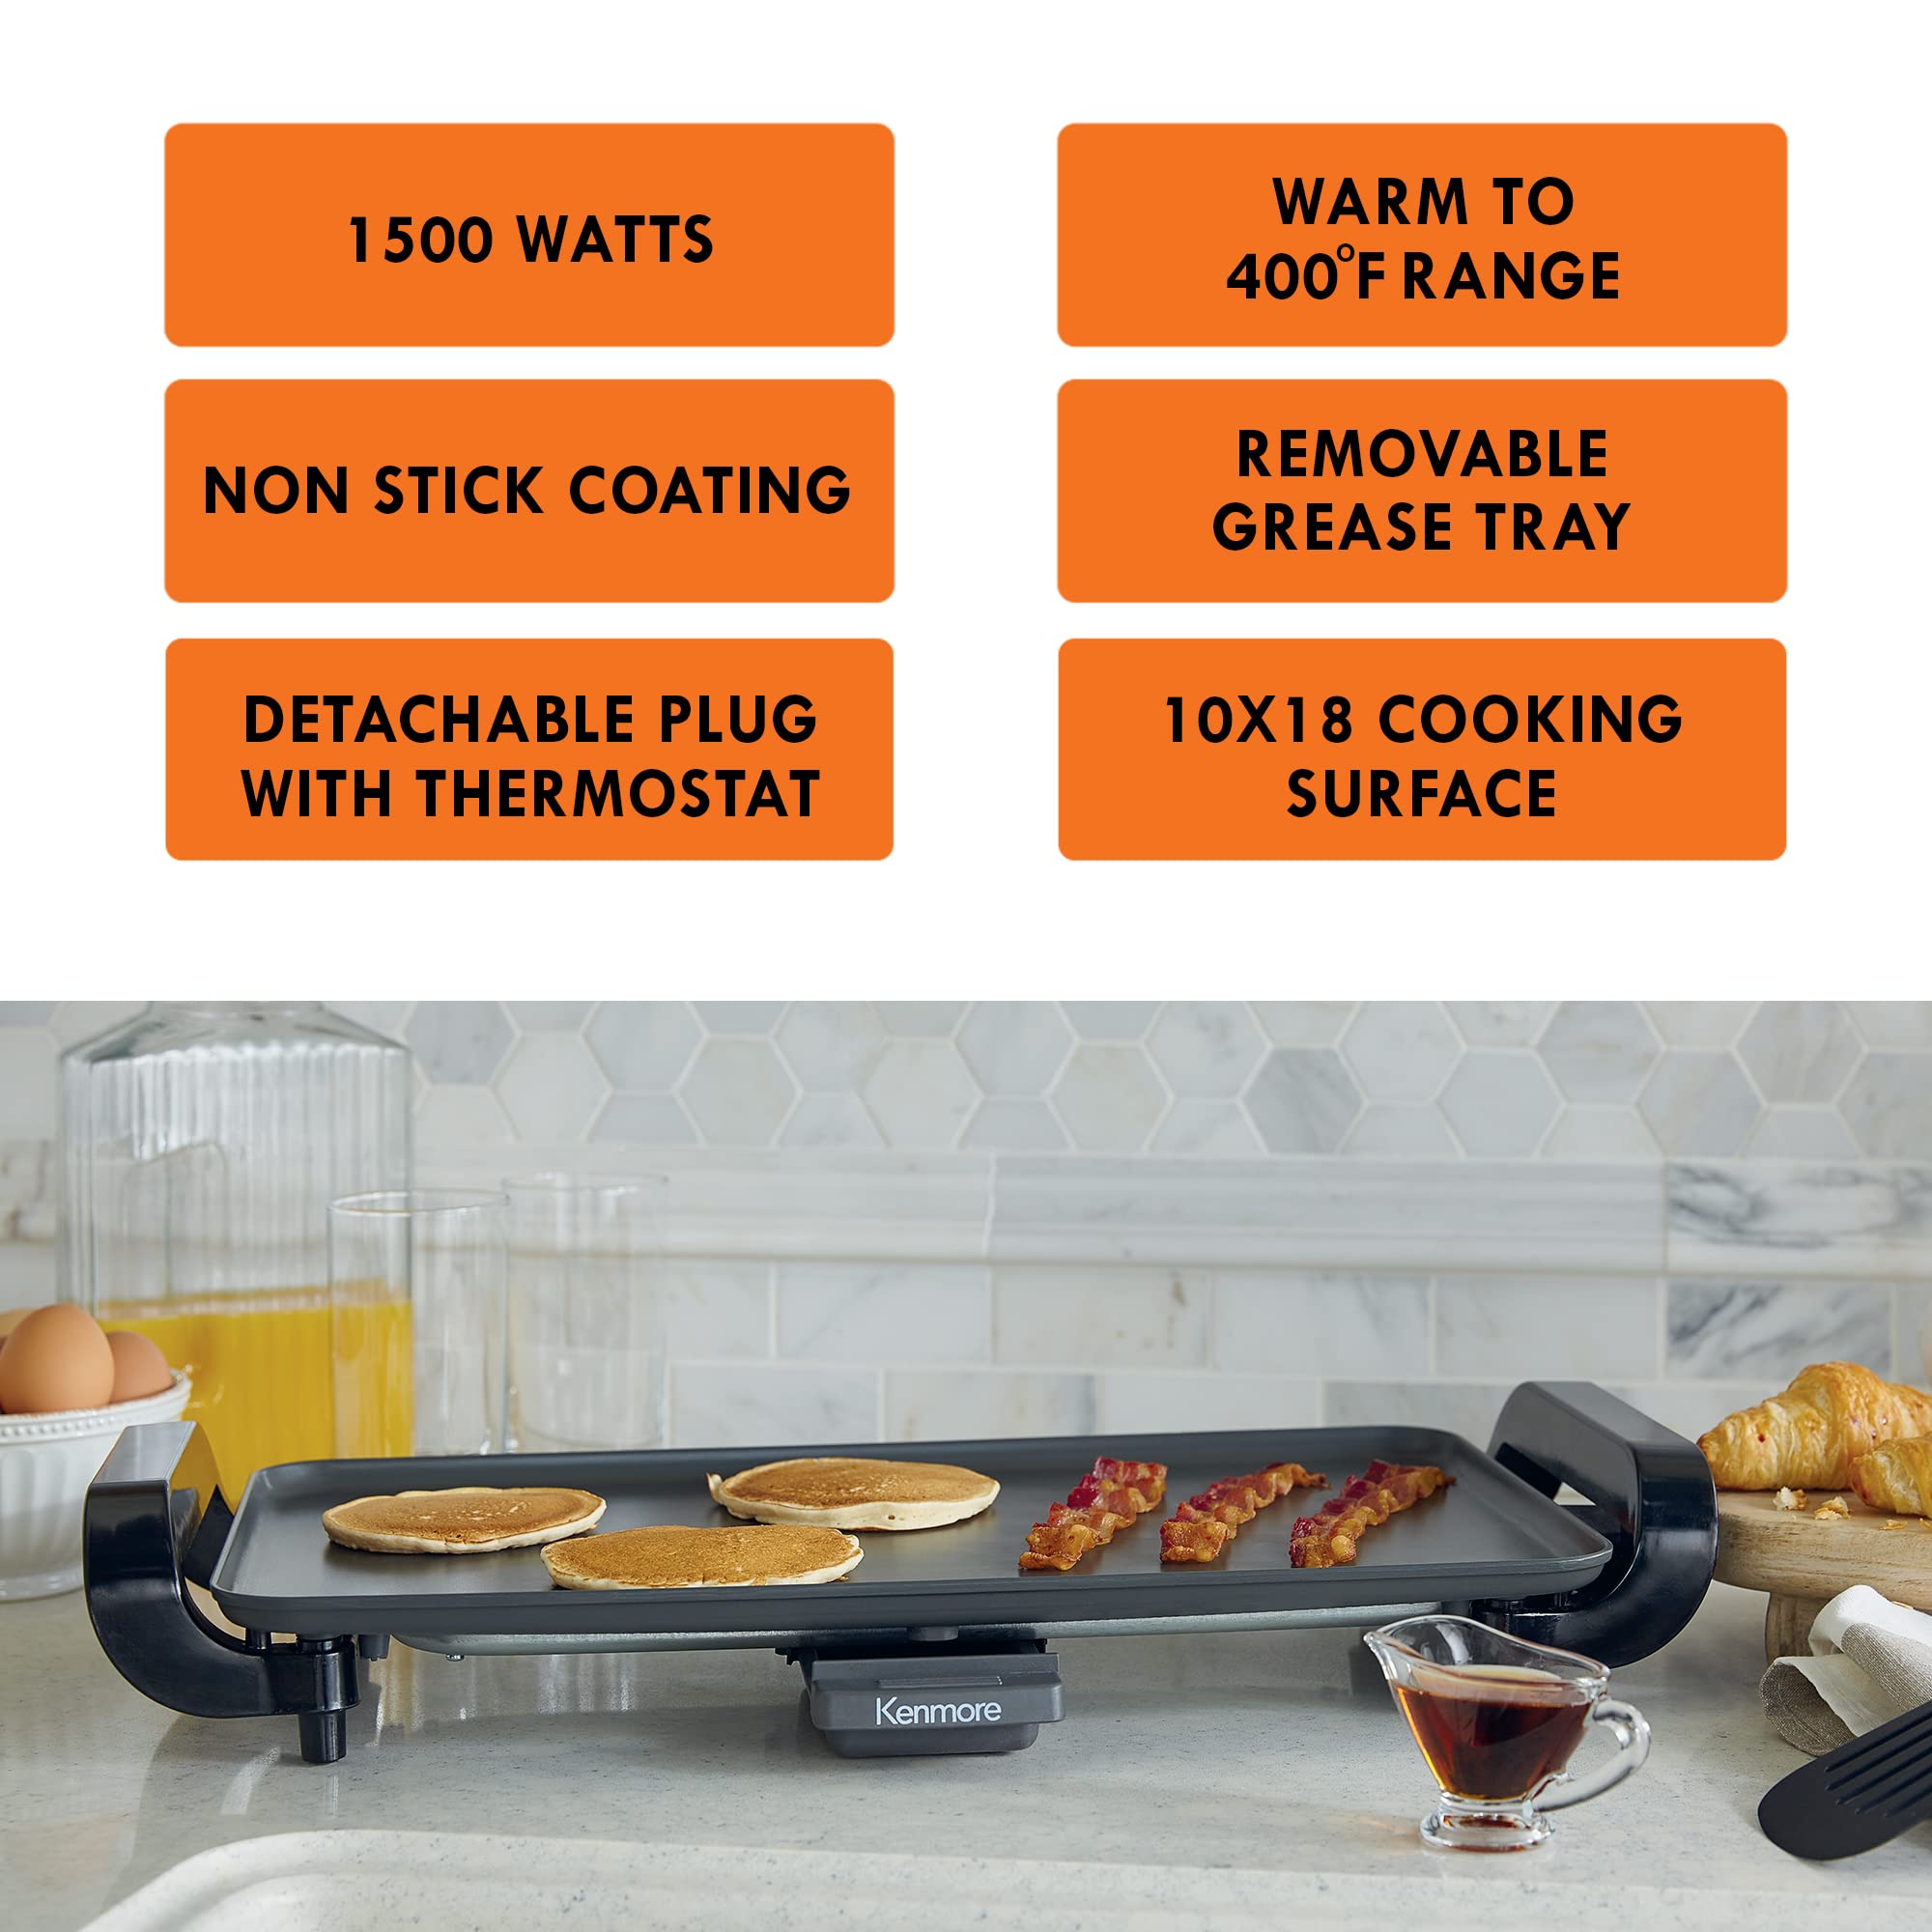 Kenmore Non-Stick Electric Griddle with Removable Drip Tray, Black, 10" x 18" Cooking Surface, Compact Countertop Cooking, Grill, Saute, Fry